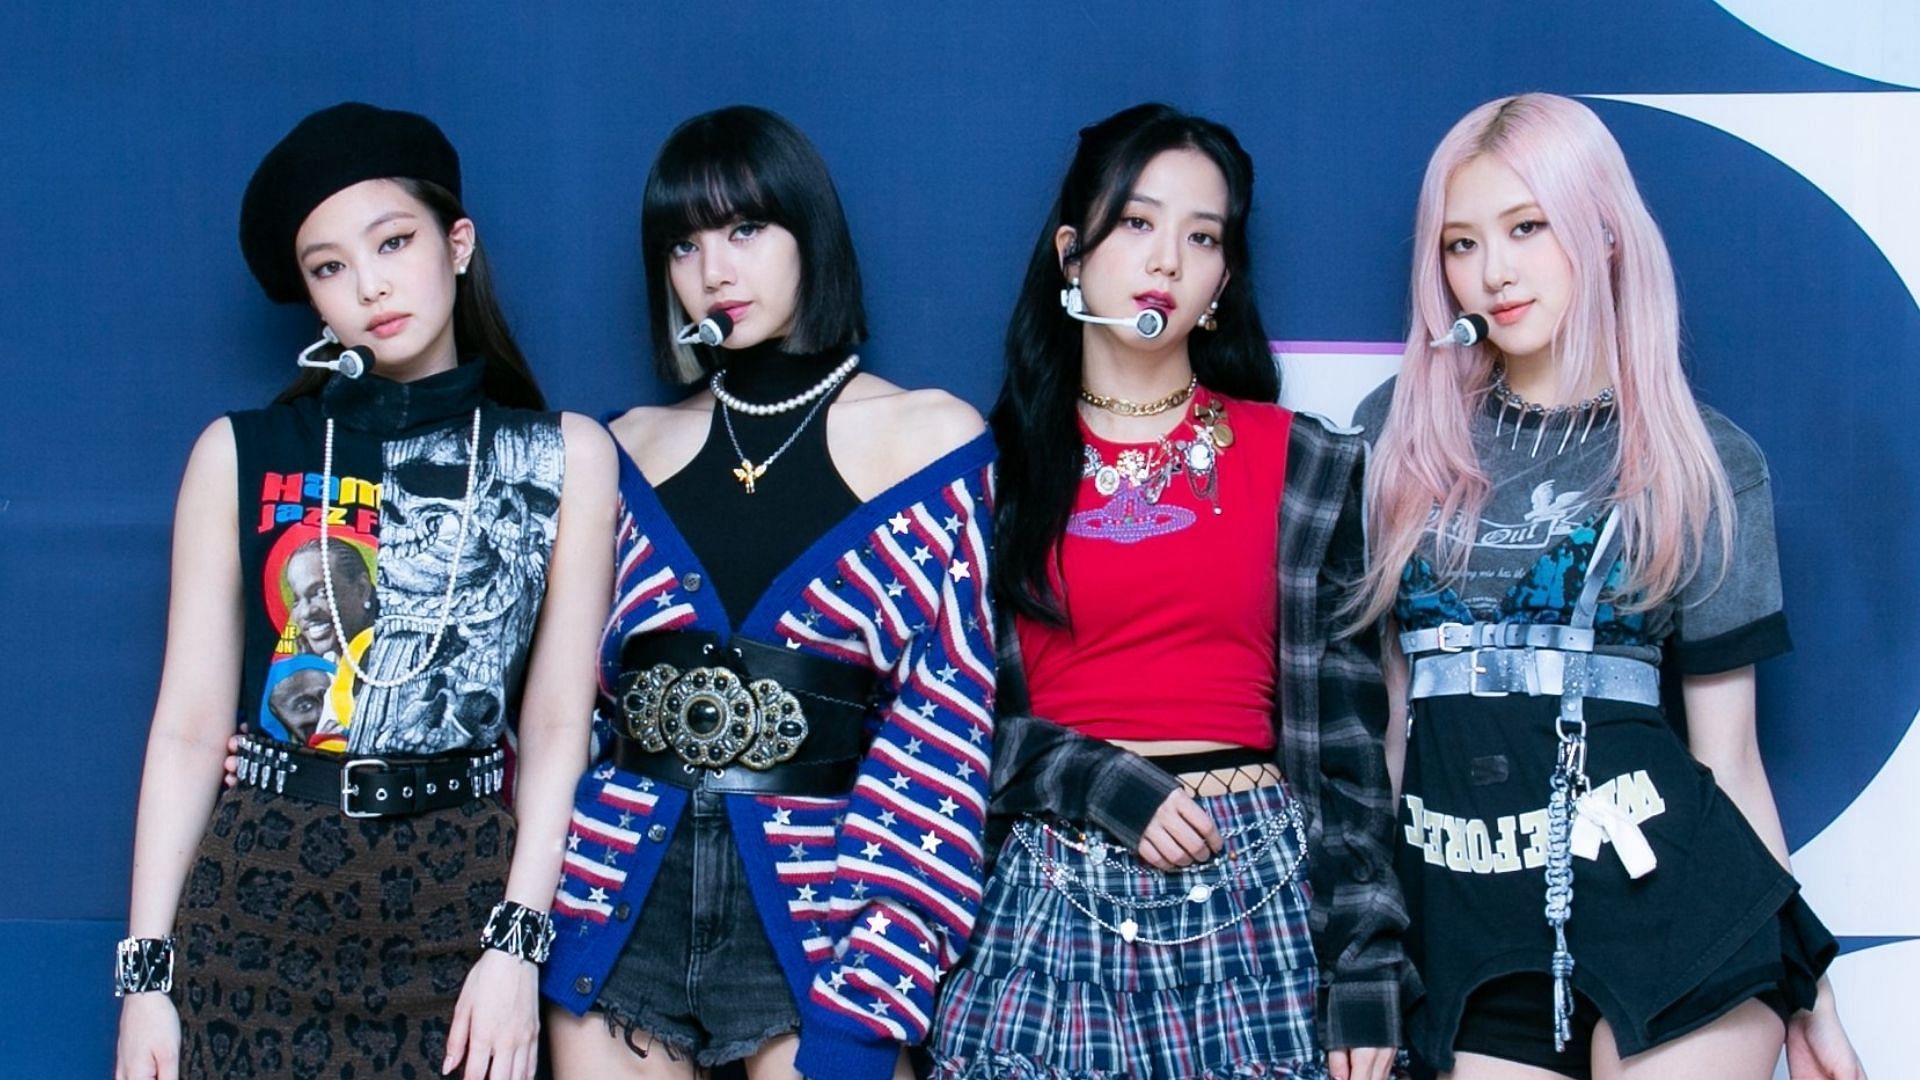 BLACKPINK Welcoming Collection 2022: Product details, Making Film, and more